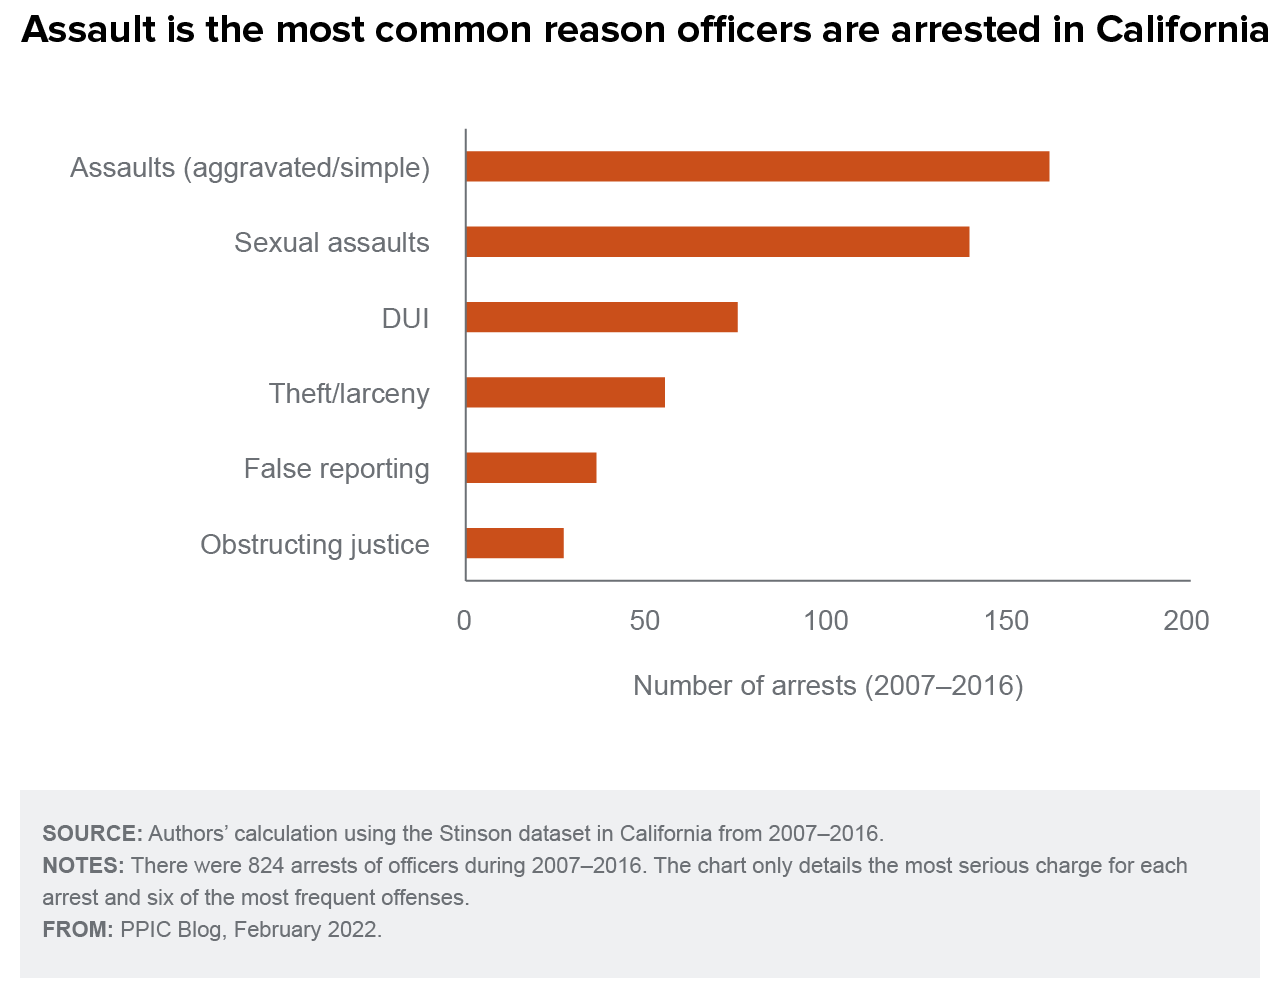 figure - Assault is the most common reason officers are arrested in California